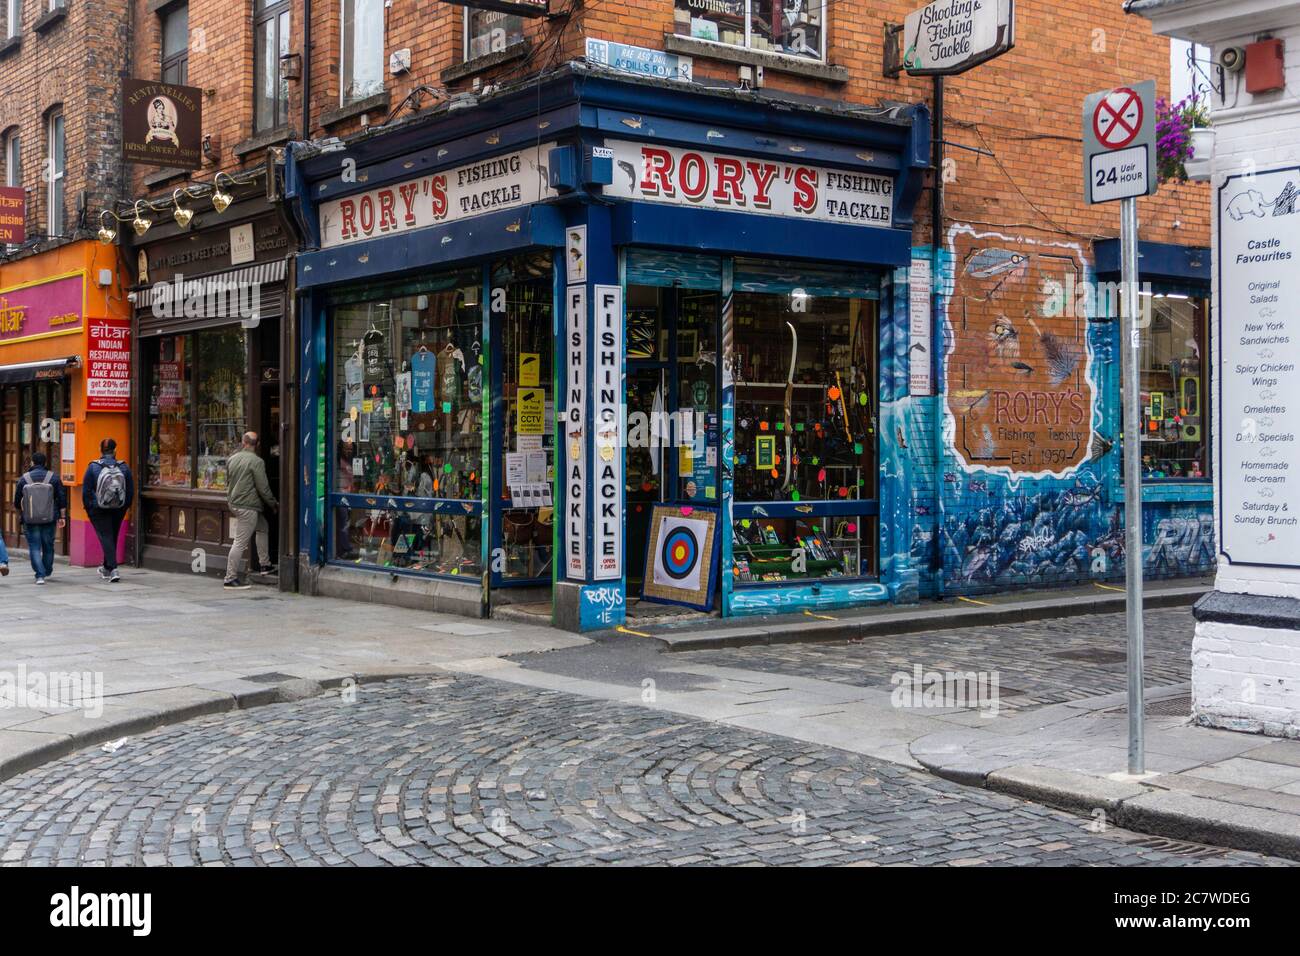 Rory's Fishing Tackle Shop situated in the heart of Temple Bar